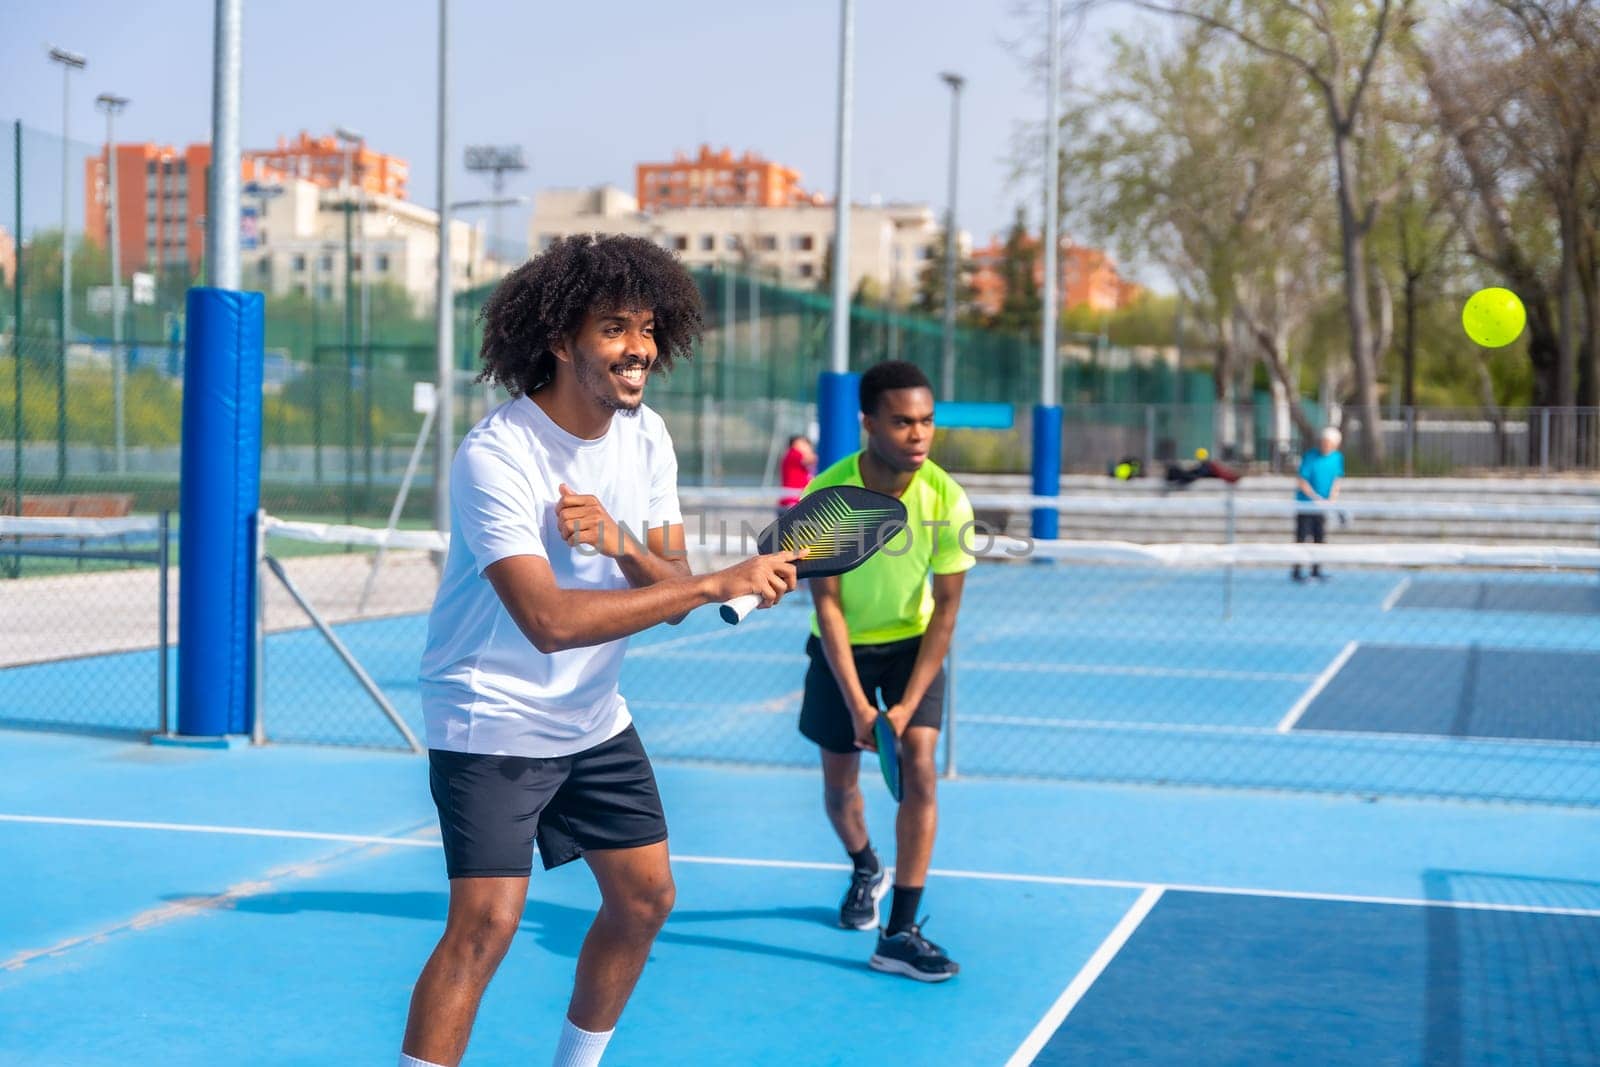 Friends enjoying playing pickleball together in an outdoor court by Huizi